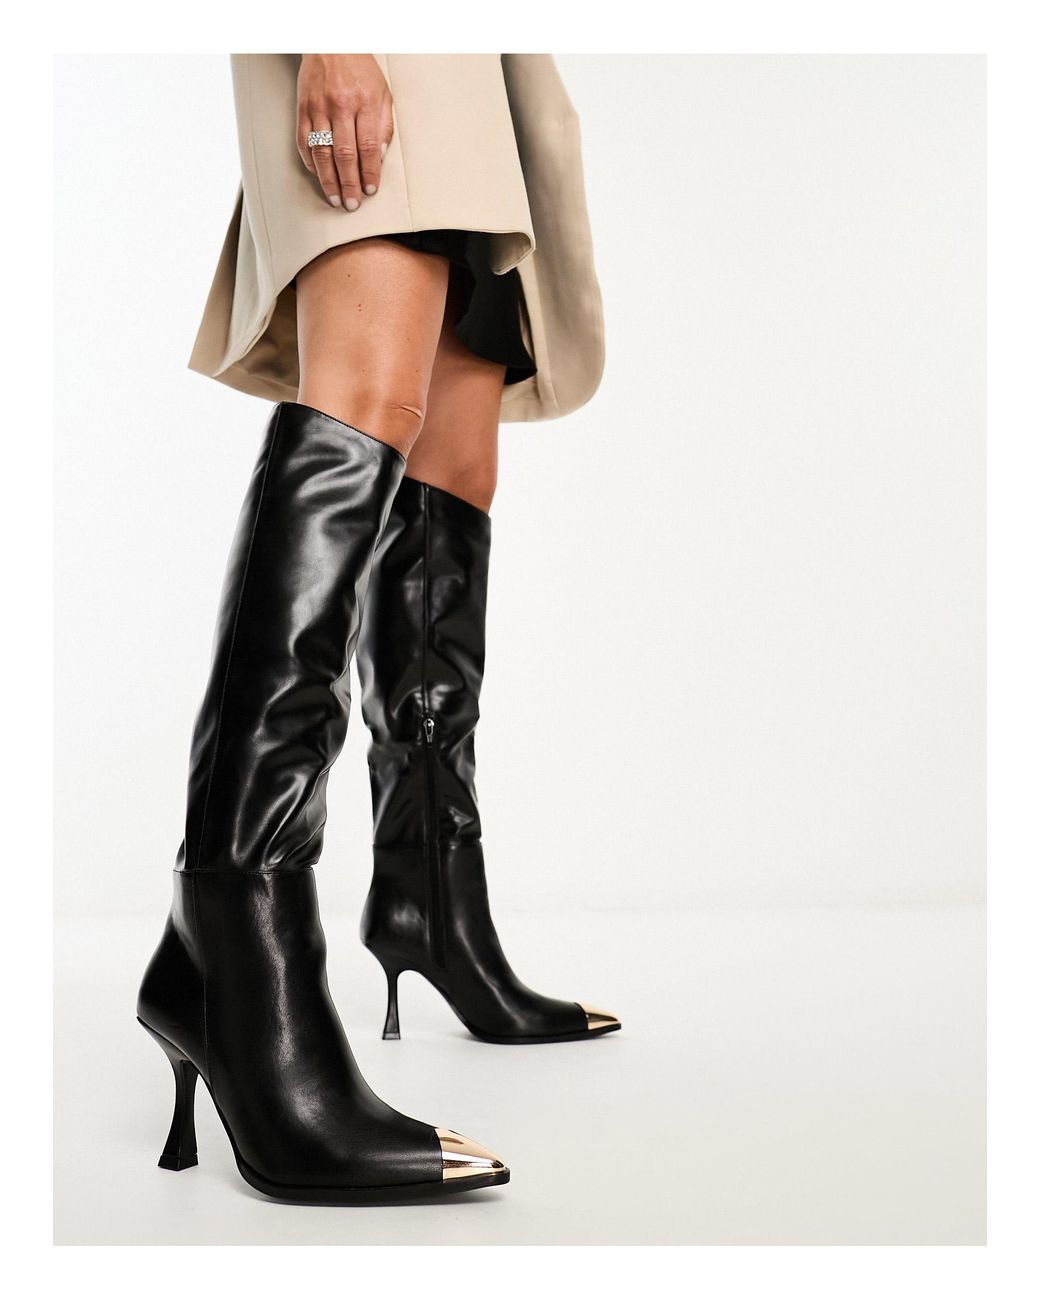 Simmi | Anusha Faux Croc Ankle Boots | Heeled Ankle Boots | SportsDirect.com